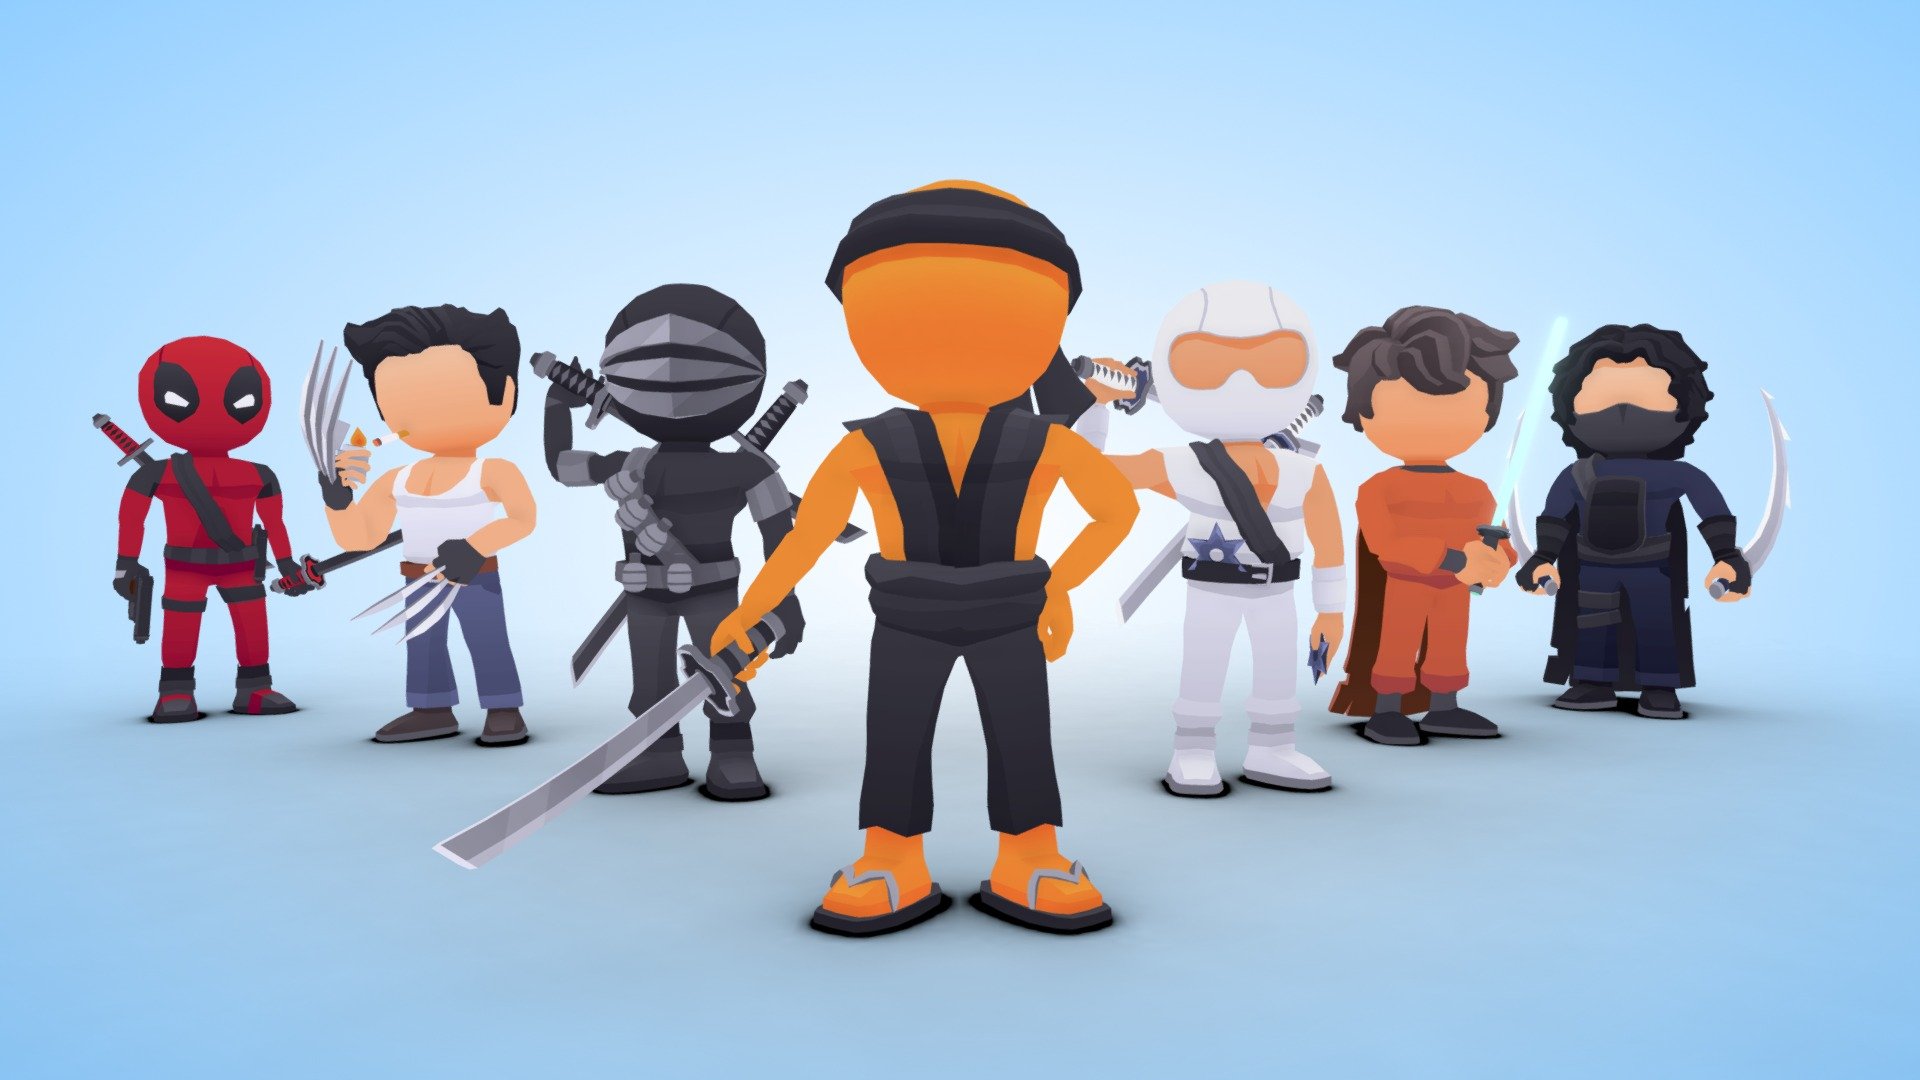 Lowpoly stickmans fighting characters ( cartoon render)
Done on blender with a single gradient map

For any special orders please contact me on my email adress:
Haykel.shaba.designer@gmail.com - Lowpoly stickmans  characters (cartoon render) - 3D model by haykel-shaba (@haykel1993) 3d model